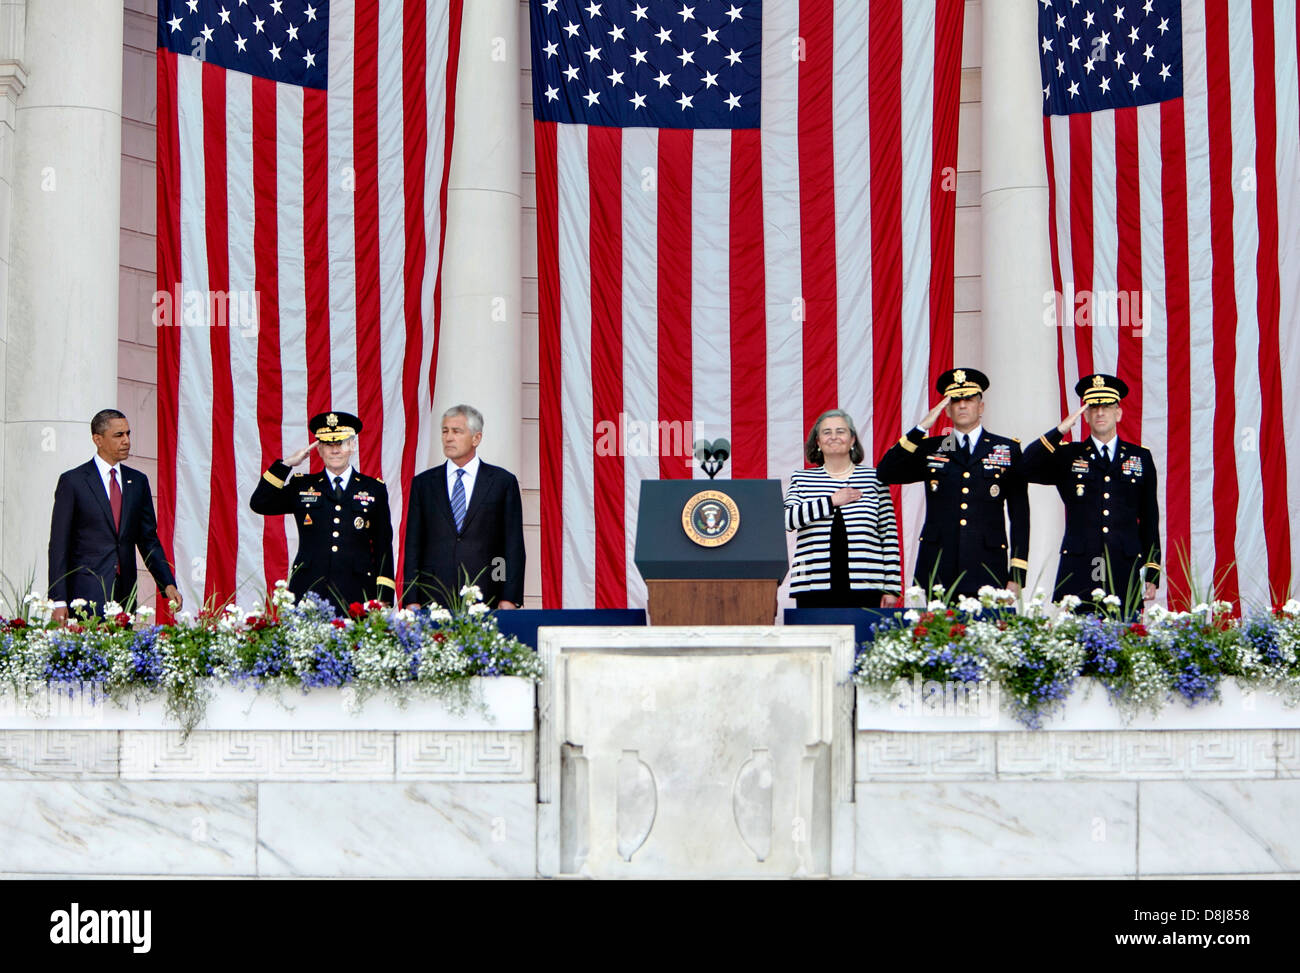 US President Barack Obama arrives to deliver a Memorial Day address at the Memorial Amphitheater at Arlington National Cemetery May 27, 2013 in Arlington , VA. Joining him: left, Gen. Martin Dempsey, chairman of the Joint Chiefs of Staff; Secretary of Defense Chuck Hagel; Kathryn Condon, the director of the Army National Cemeteries; Maj. Gen. Michael Linnington, the commanding general of the Military District of Washington; and Col. Michael Brainerd, chaplain. Stock Photo